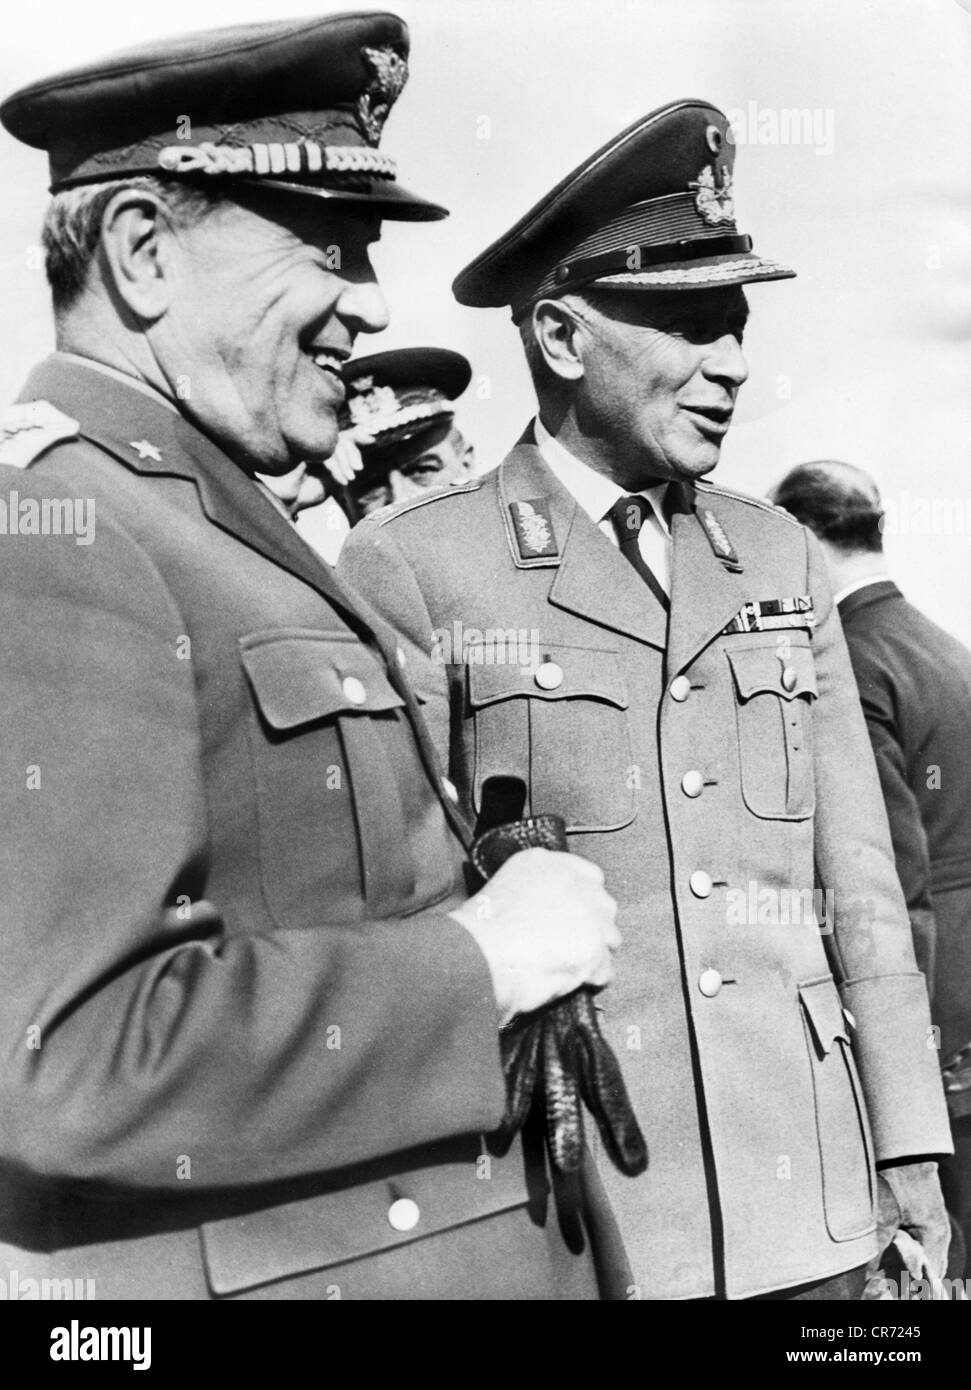 Heusinger, Adolf, 4.8.1897 - 30.11.1982, German general, Inspector General of the Bundeswehr 1.6.1957 - 31.3.1961, visit to Italy, with Italian Chief of General Staff, Rome, 7.5.1958, , Stock Photo